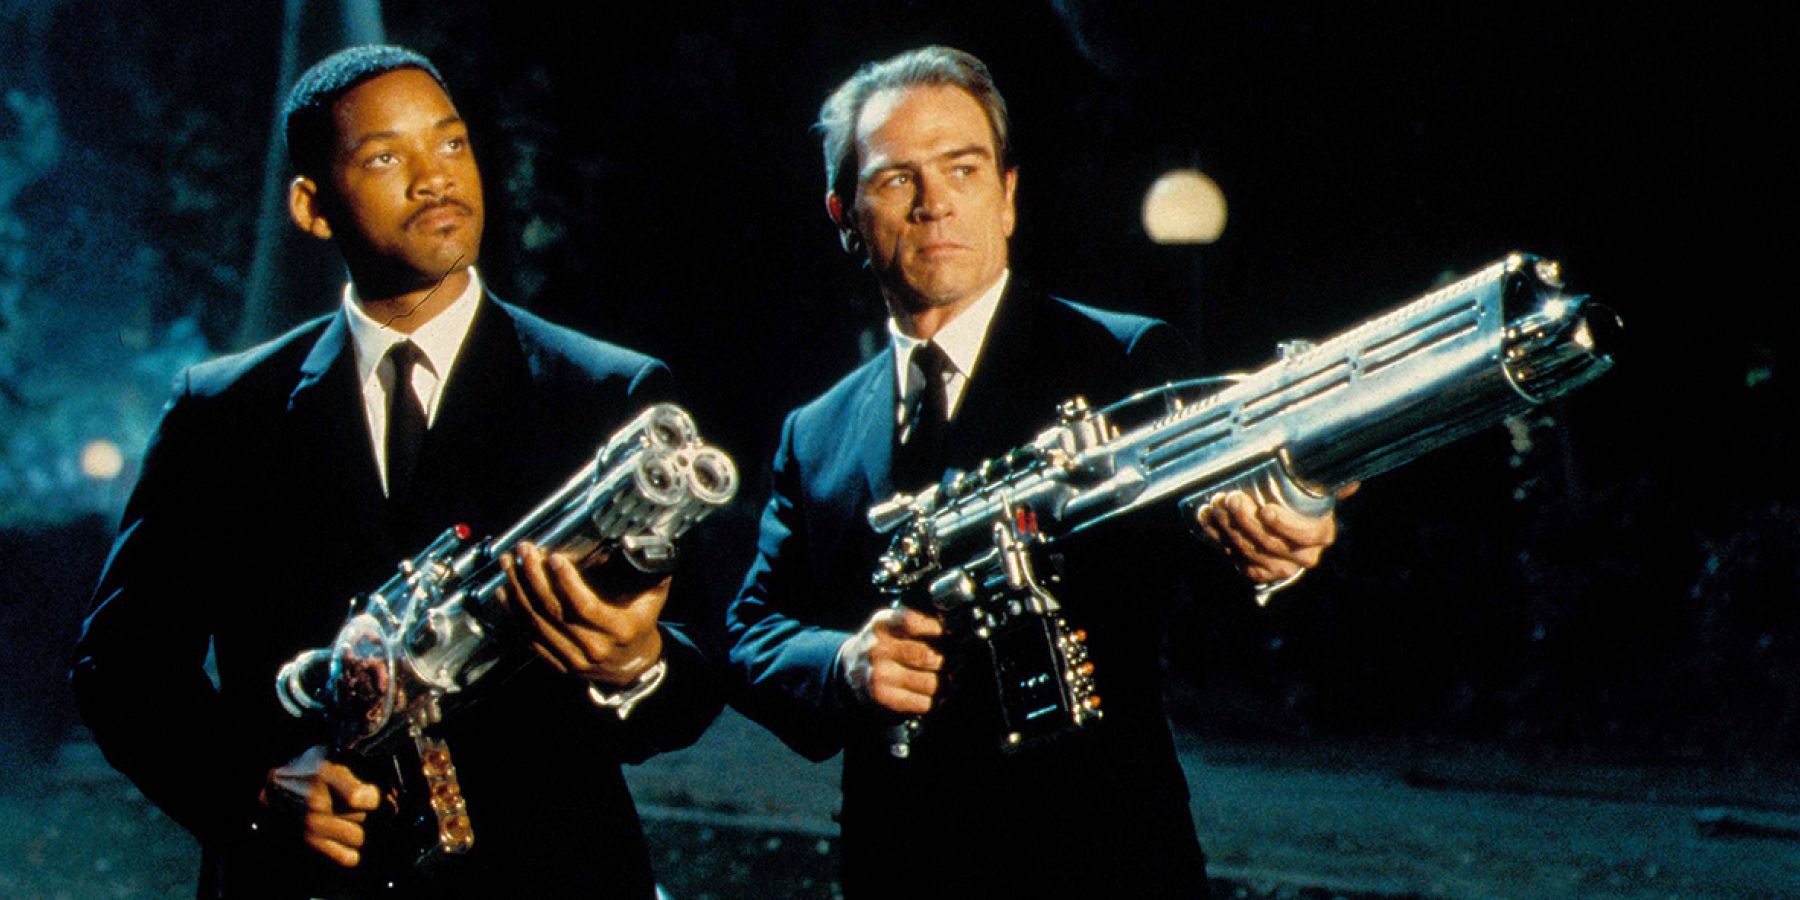 Agents J and K pointing huge guns at the end of Men in Black